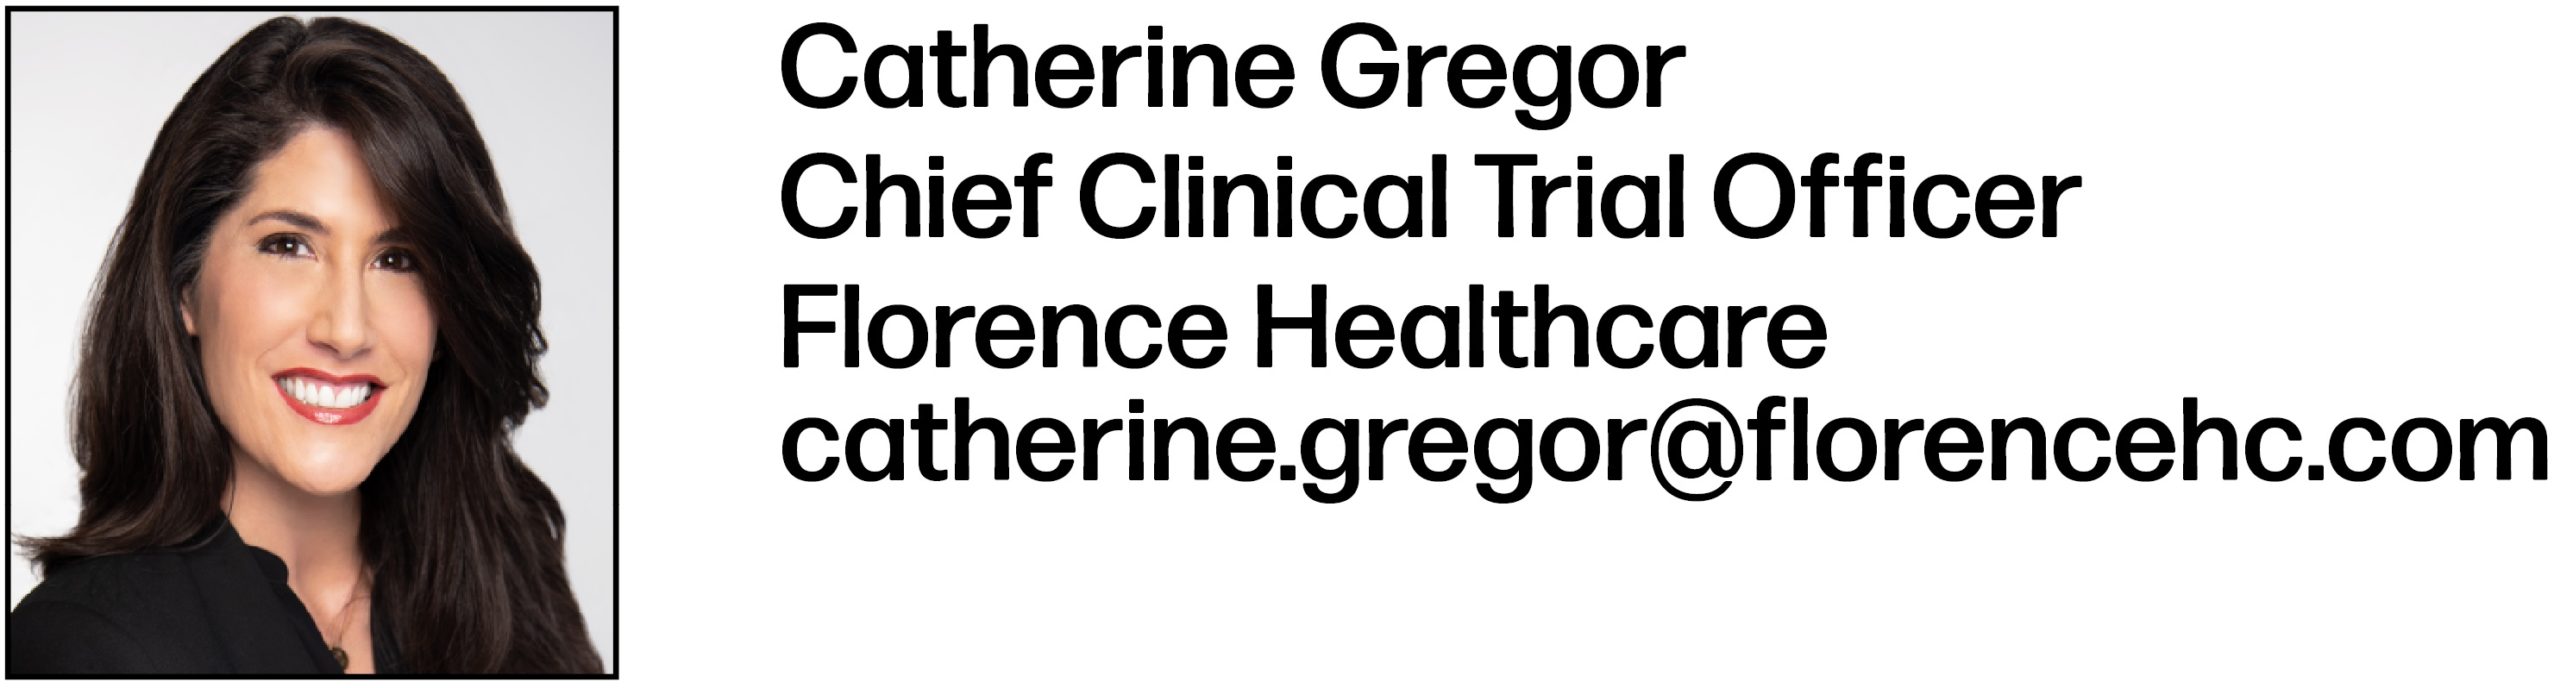 Headshot of Catherine Gregor, who is listed as Chief Clinical Trial Officer of Florence Healthcare. Her email is catherine.gregor@florencehc.com.